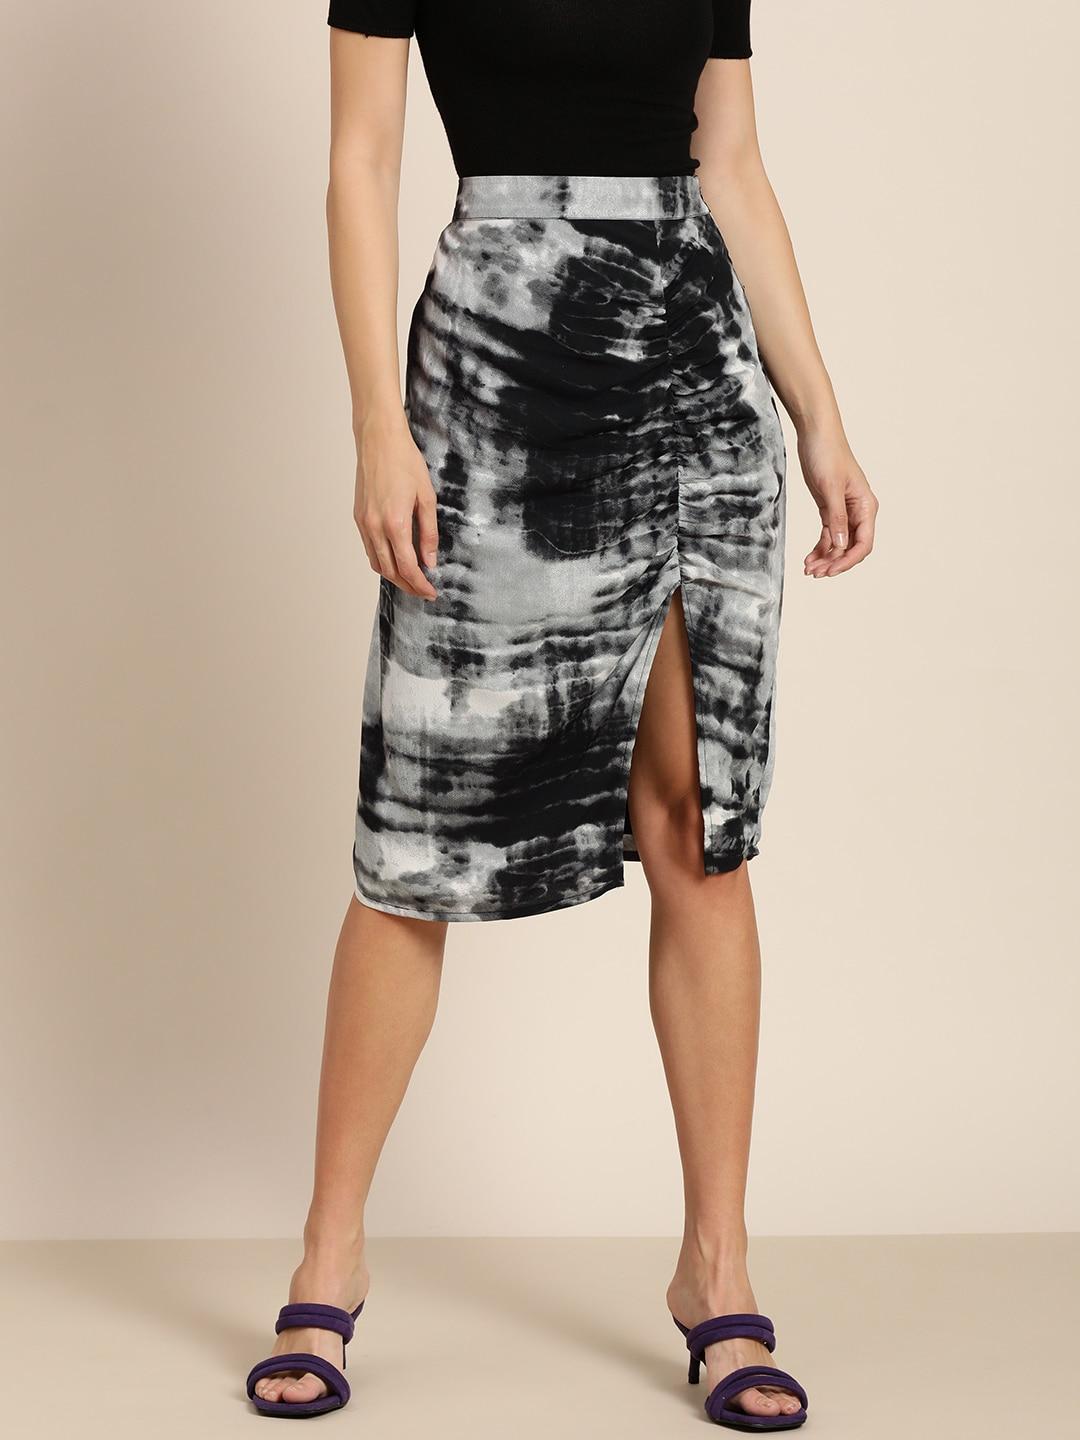 marie claire women black & grey tie & dyed ruched detail high-slit a-line skirt